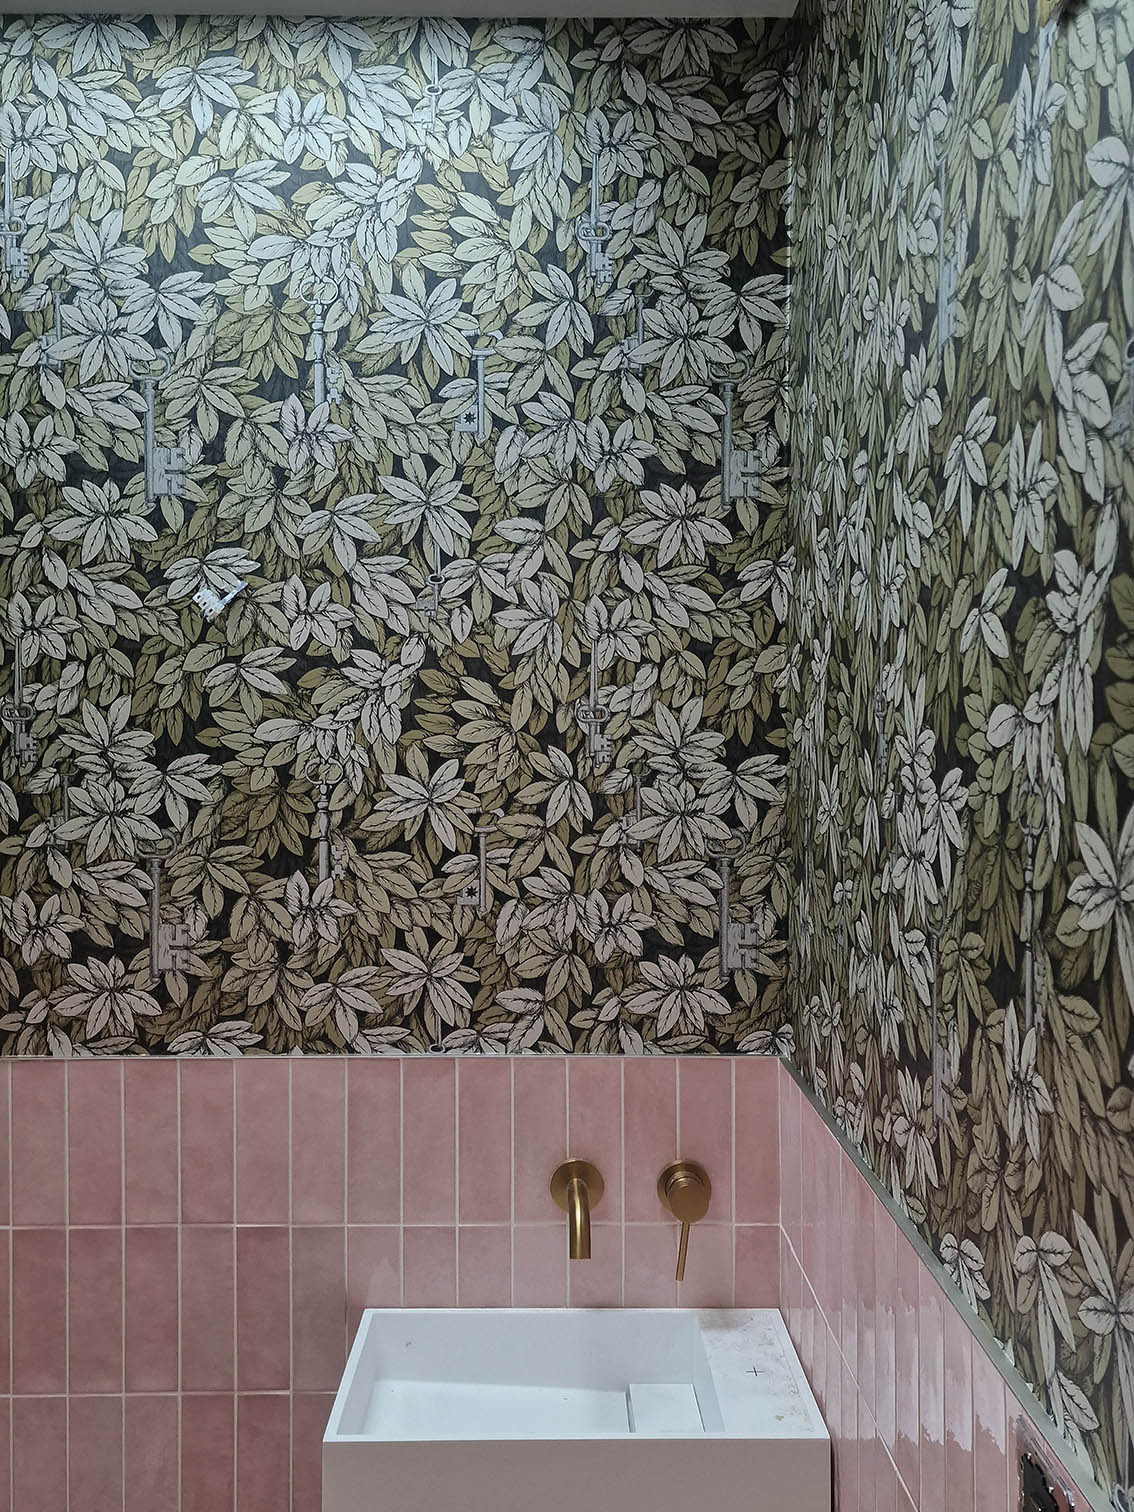 Cole and Son ` Chiavi Segrete wallpaper professionally installed in a bathroom. The wallpaper has green leaves pattern and is combined with pink tiles.